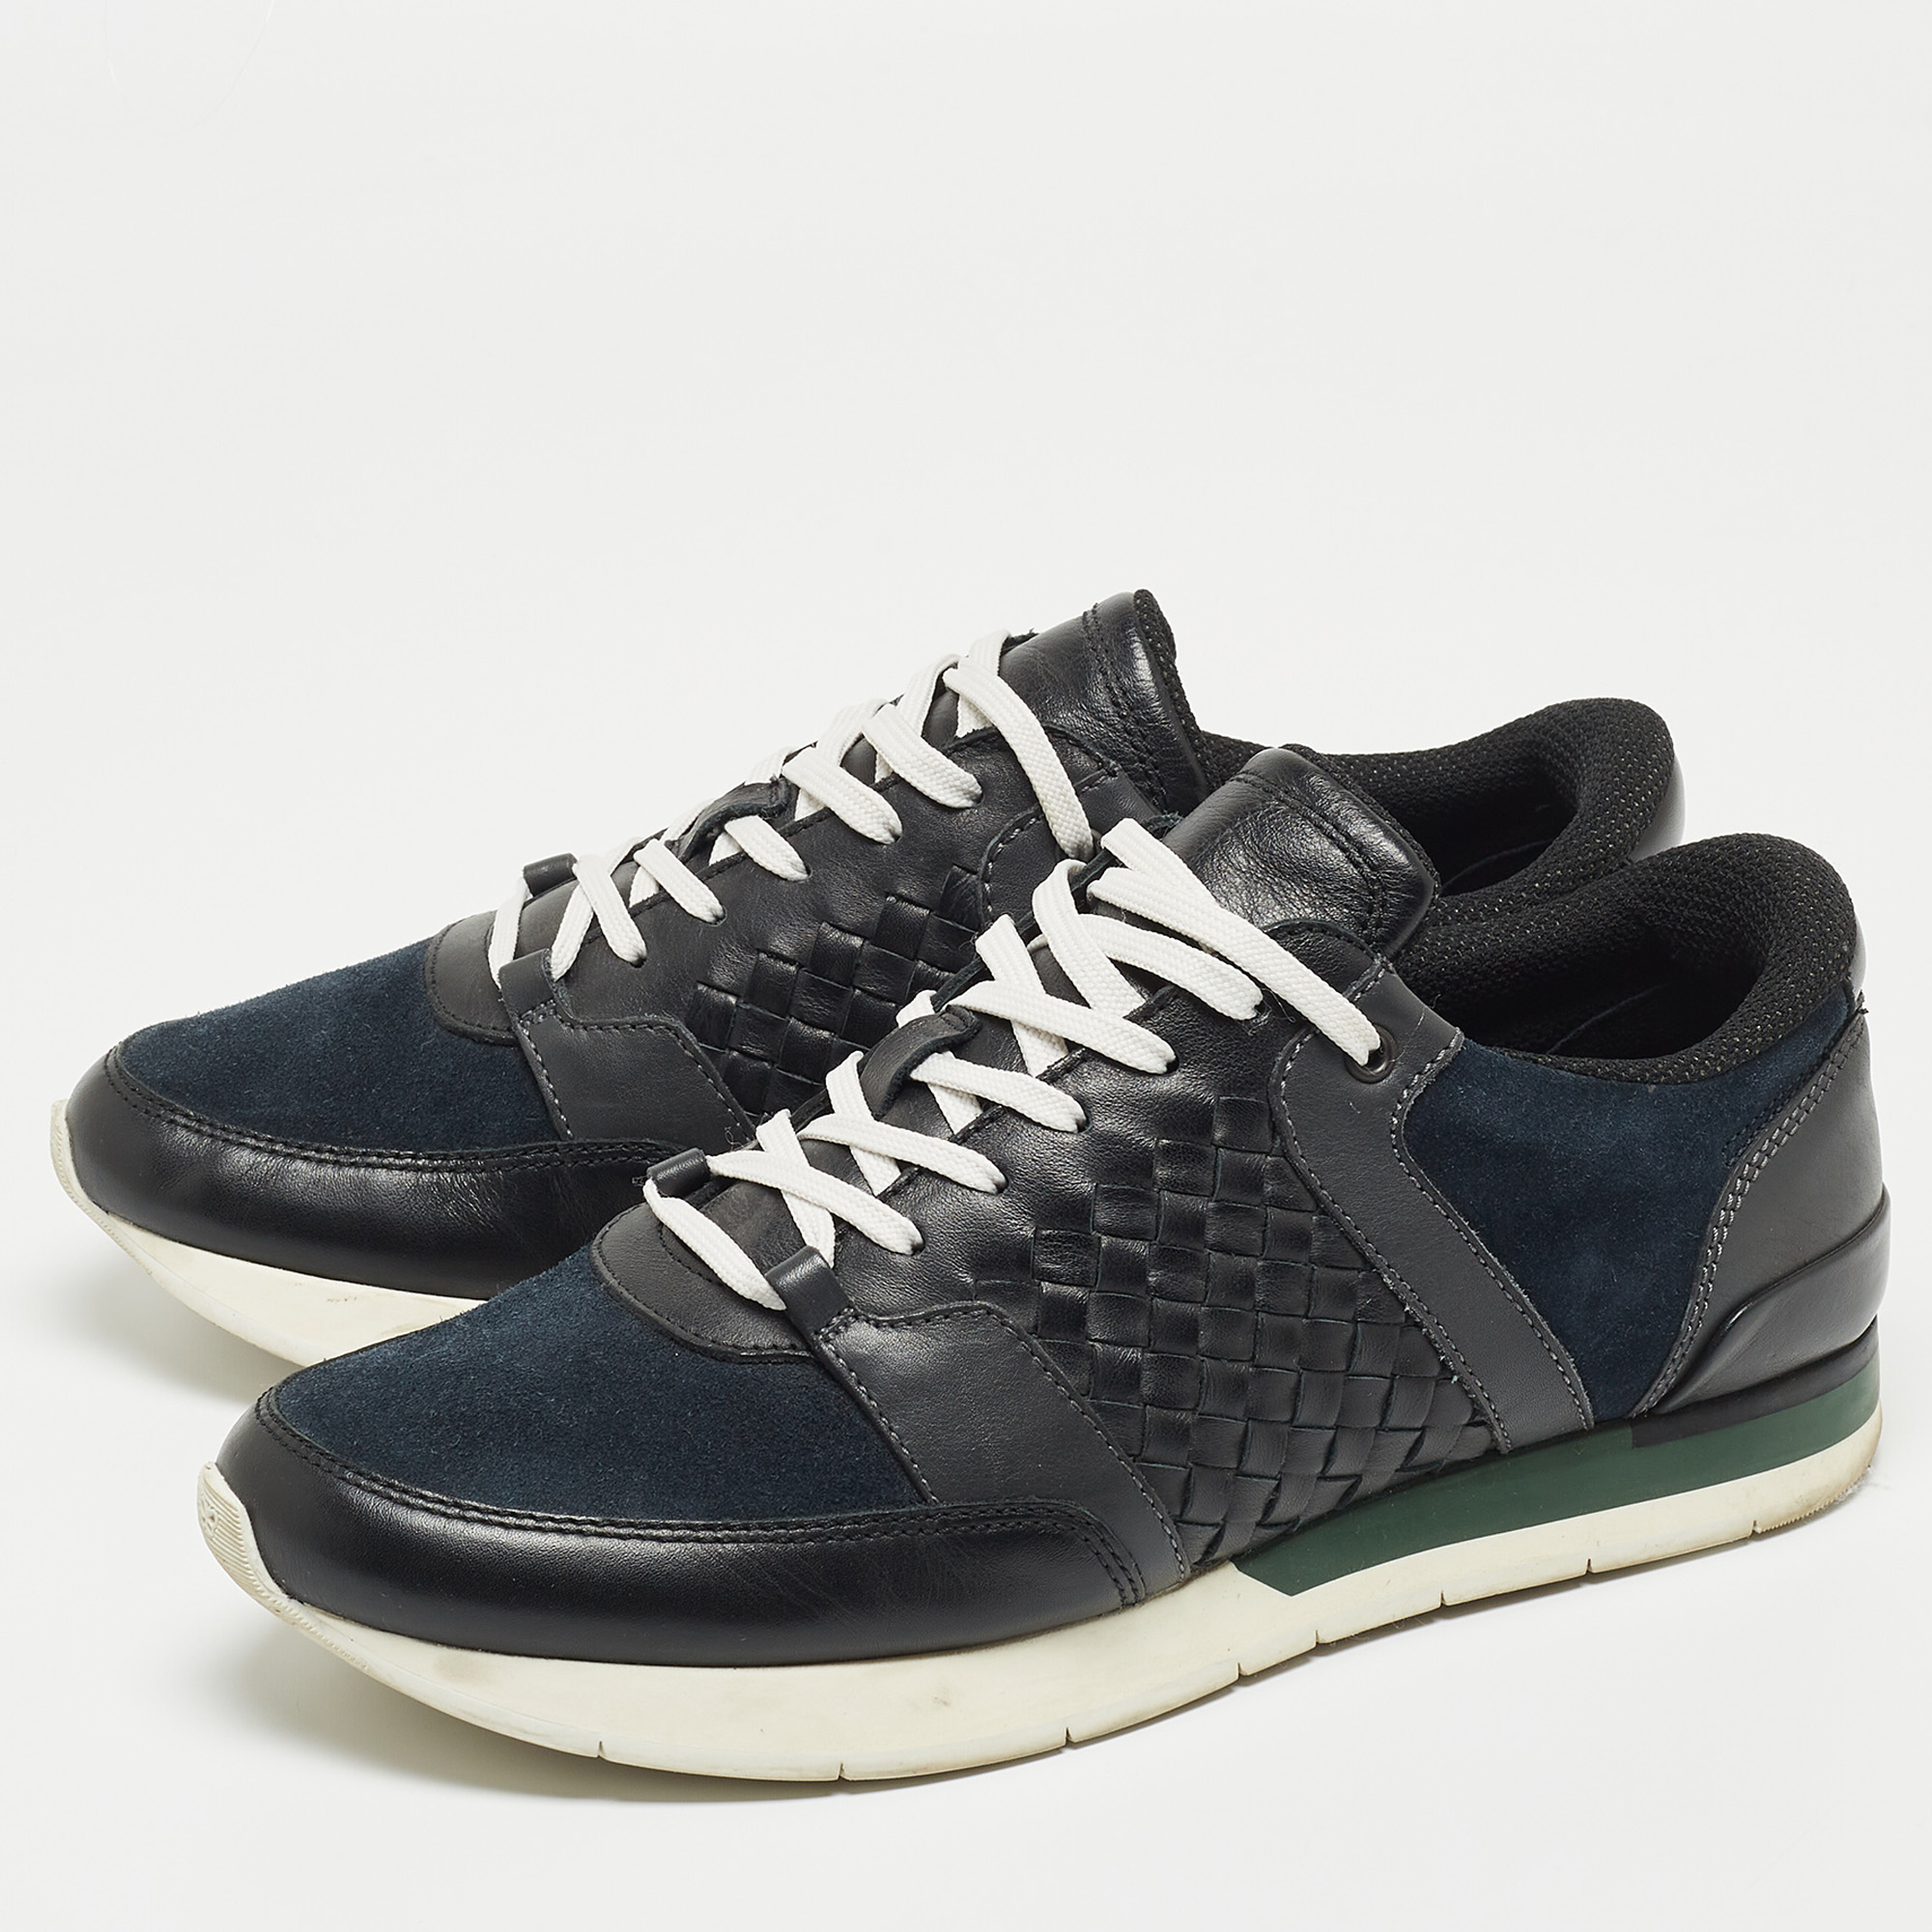 

Bottega Veneta Navy Blue/Black Intrecciato Leather and Suede Lace Up Sneakers Size